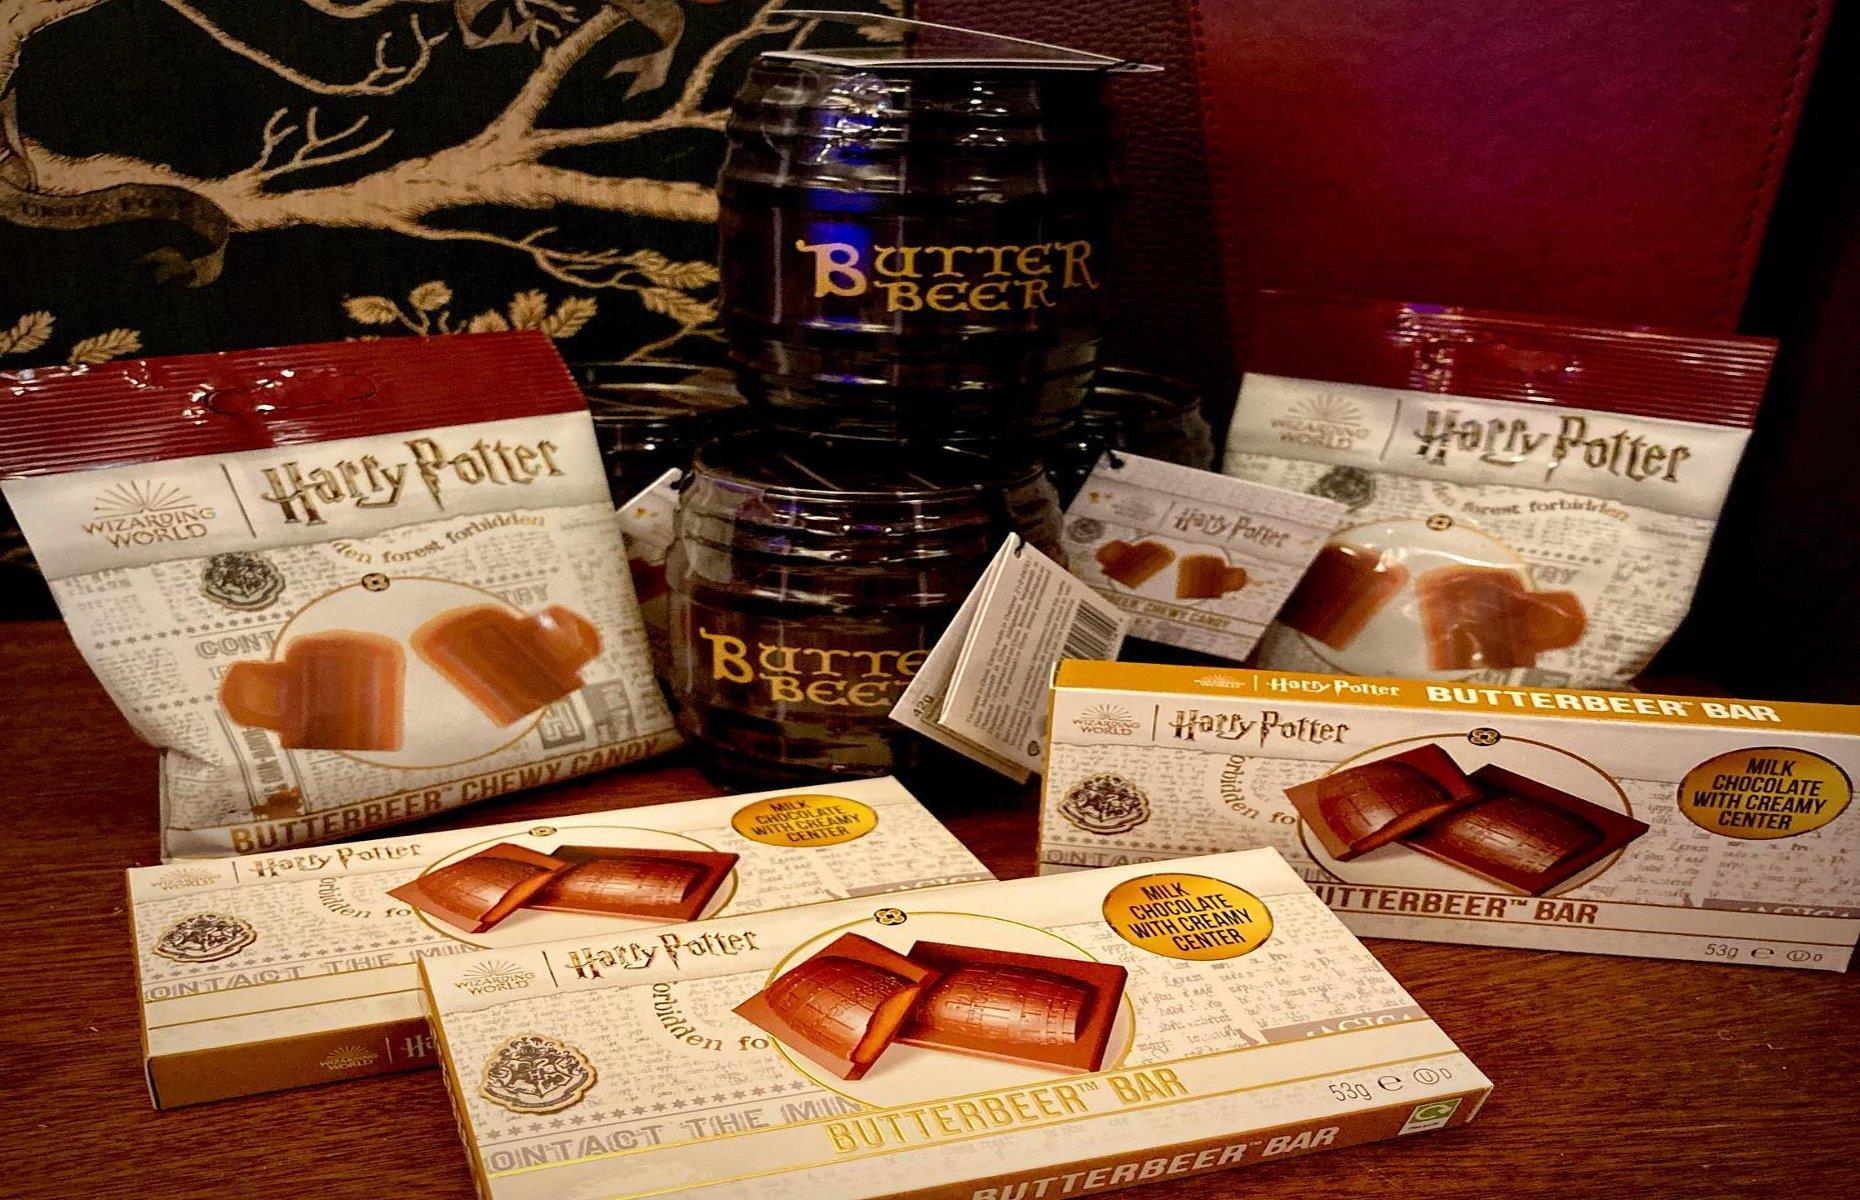 <p>A bewitching array of Potter-inspired food and drinks are on offer at this enchanting <a href="https://www.phoenixbookcafe.com/">one-of-a-kind café bookshop</a>, including Moony’s Chocolate Mousse, OWL Toast and Molly’s Cauldron Cake (a charming nod to the Weasley matriarch). Fans with an especially sweet tooth should seize the opportunity to stock up on Butterbeer-flavoured chocolate bars and chewy candies, too.</p>